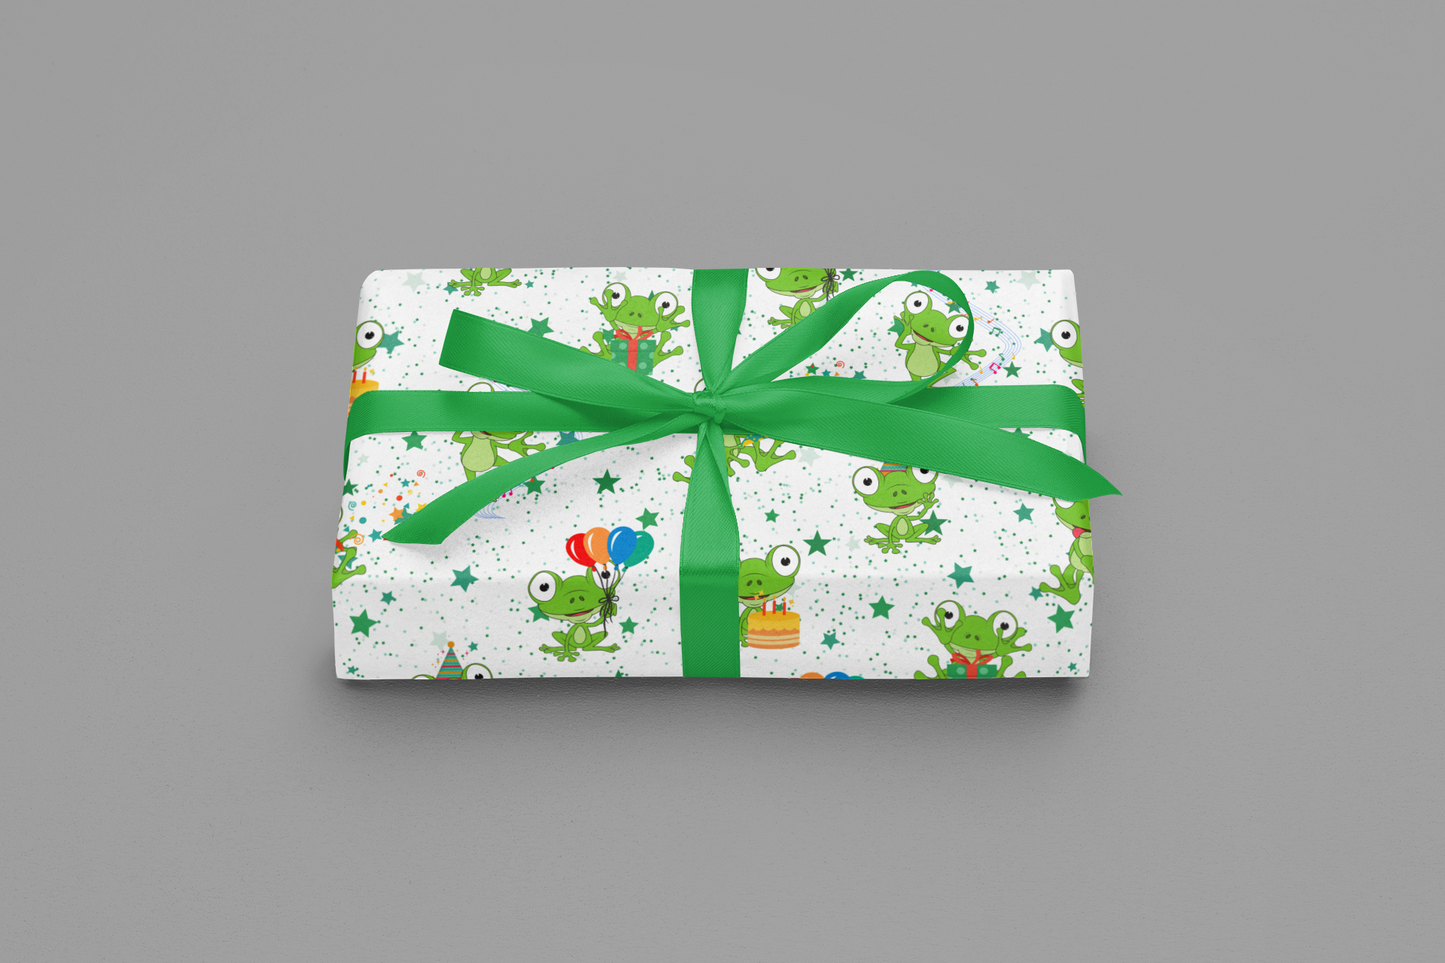 Frog Wrapping Paper Birthday Wrapping Paper Roll Cute Gift Wrap For Birthday 6 Foot Roll Green Gift Wrapping Paper For Frog Lover Gift